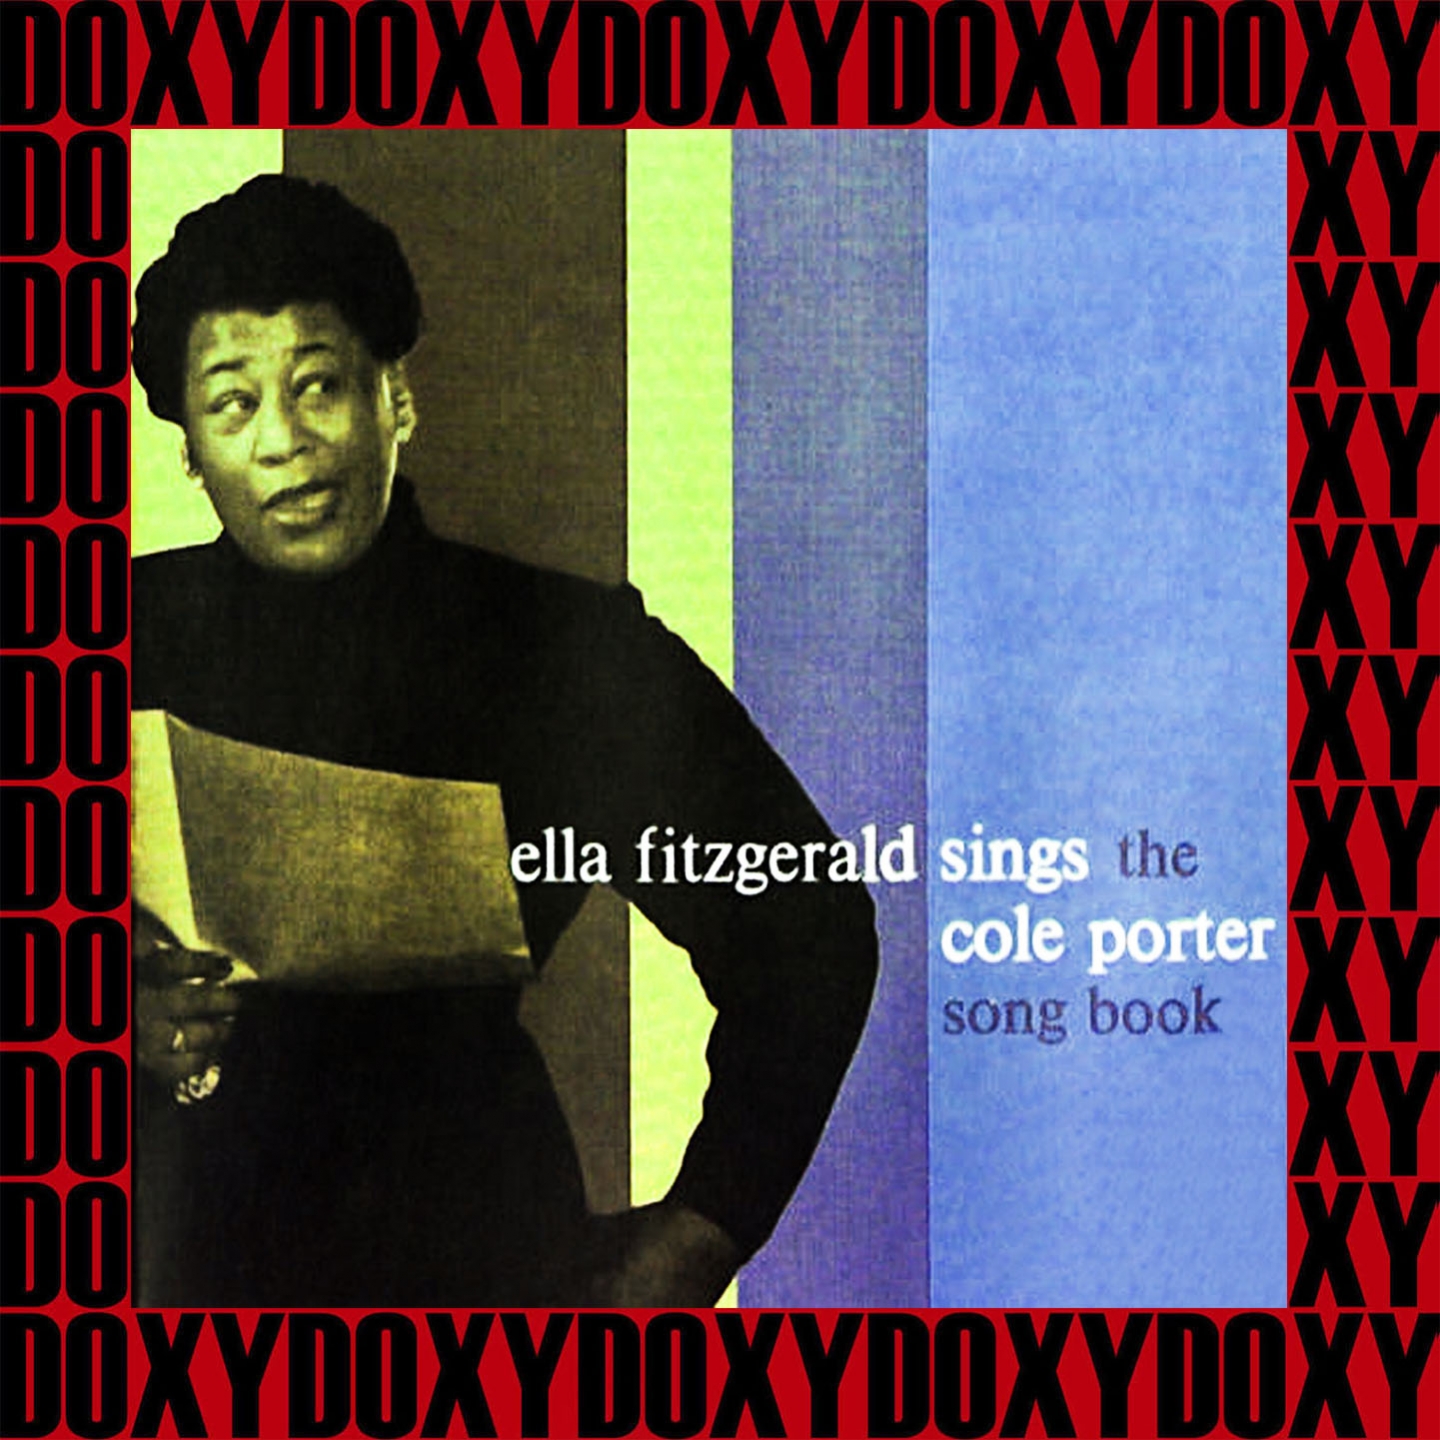 The Complete Ella Fitzgerald Sings the Cole Porter Song Book Sessions (Hd Remastered Edition, Doxy Collection)